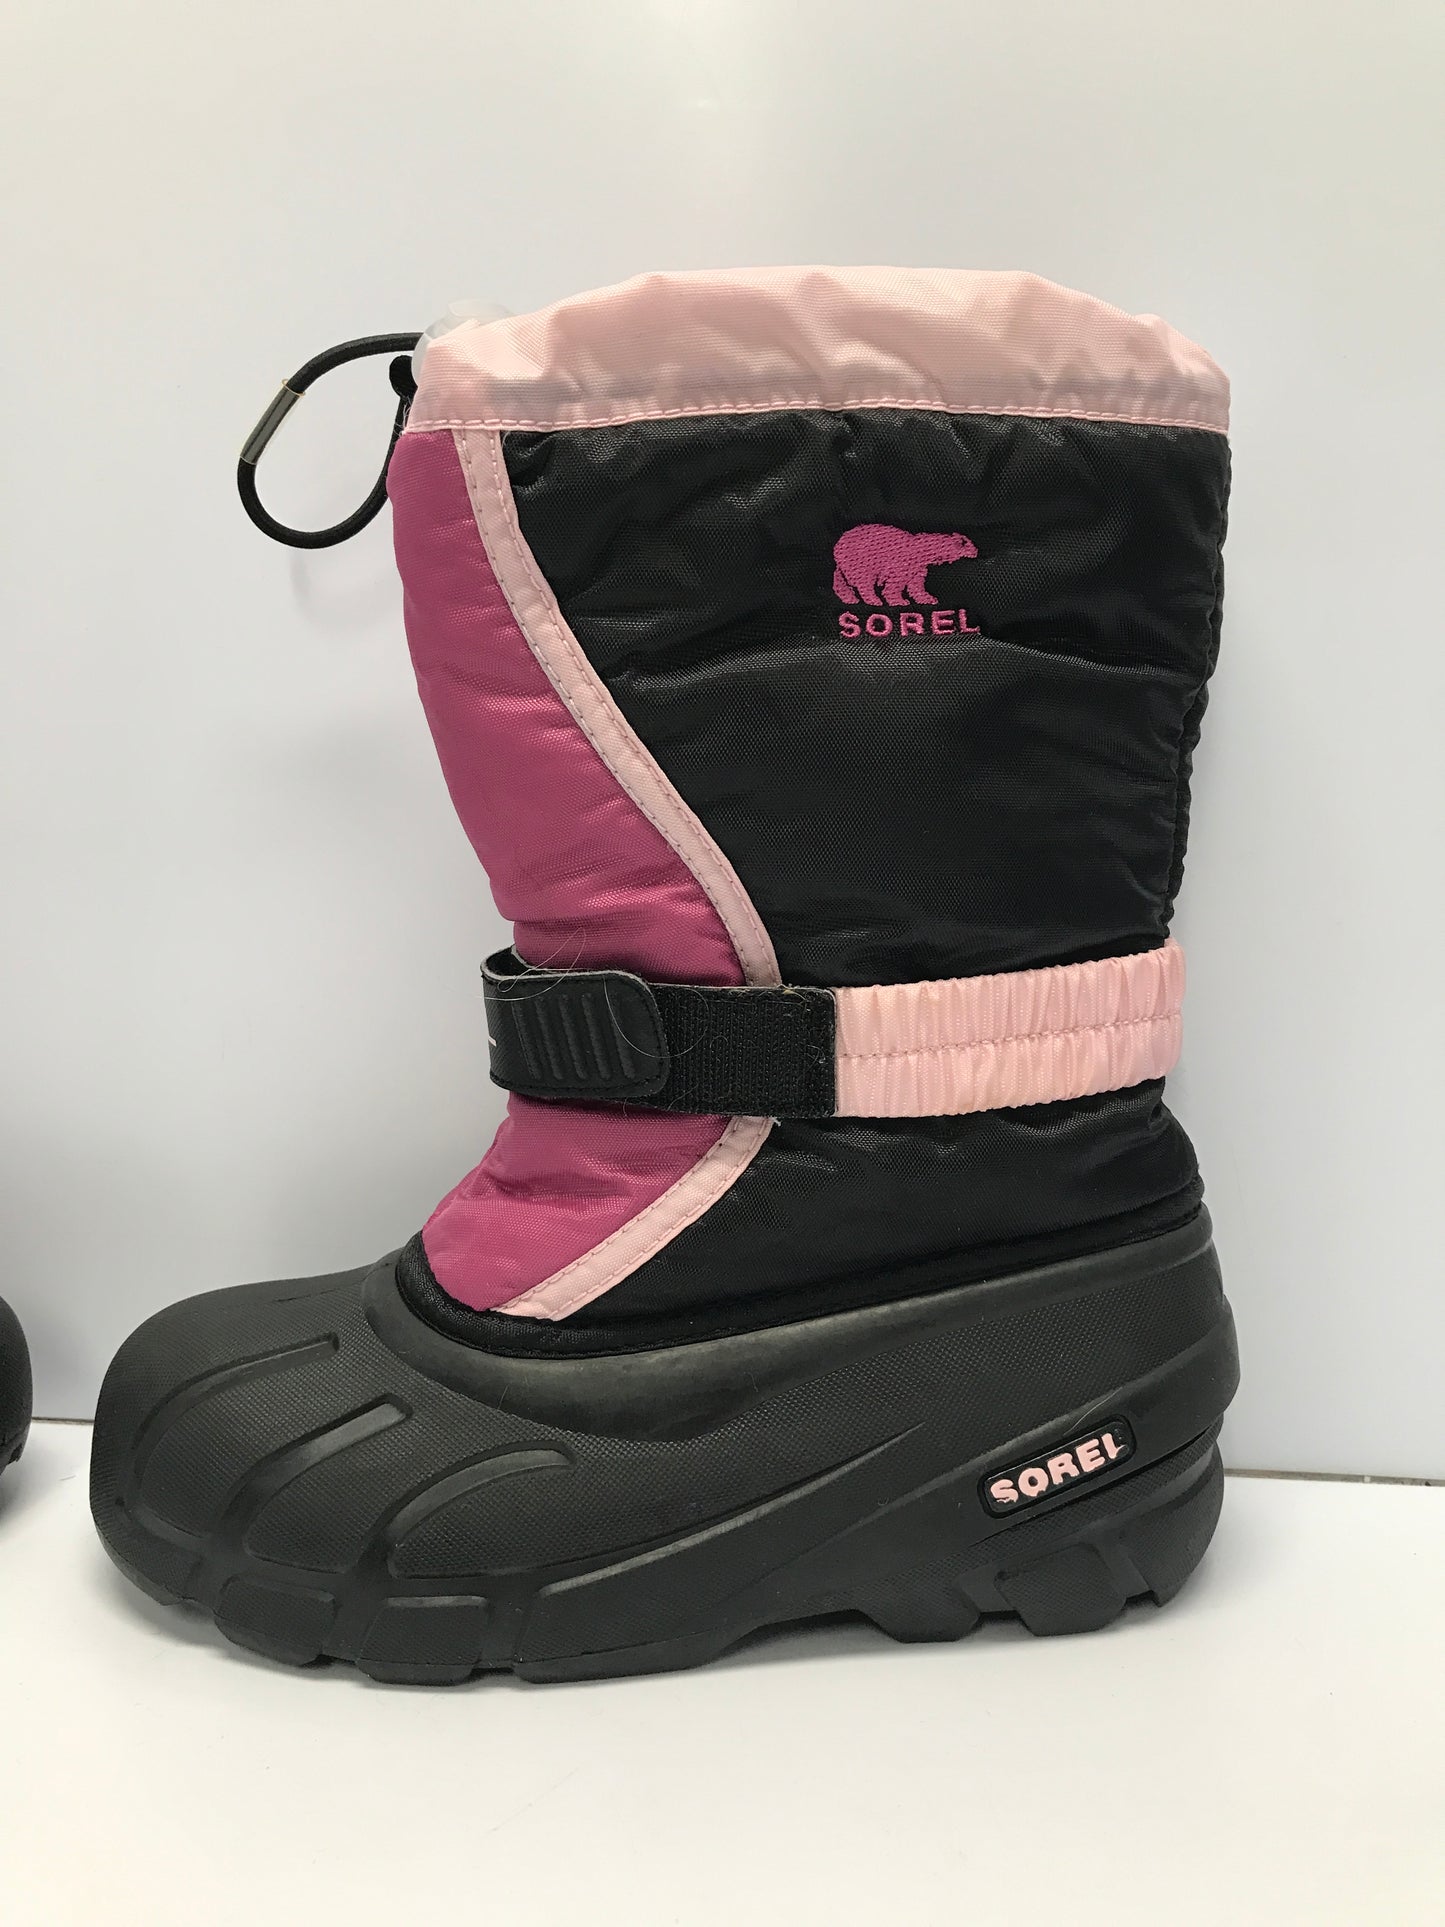 Winter Snow Boots Child Size 3 Sorel Black Pink With Liners Like New